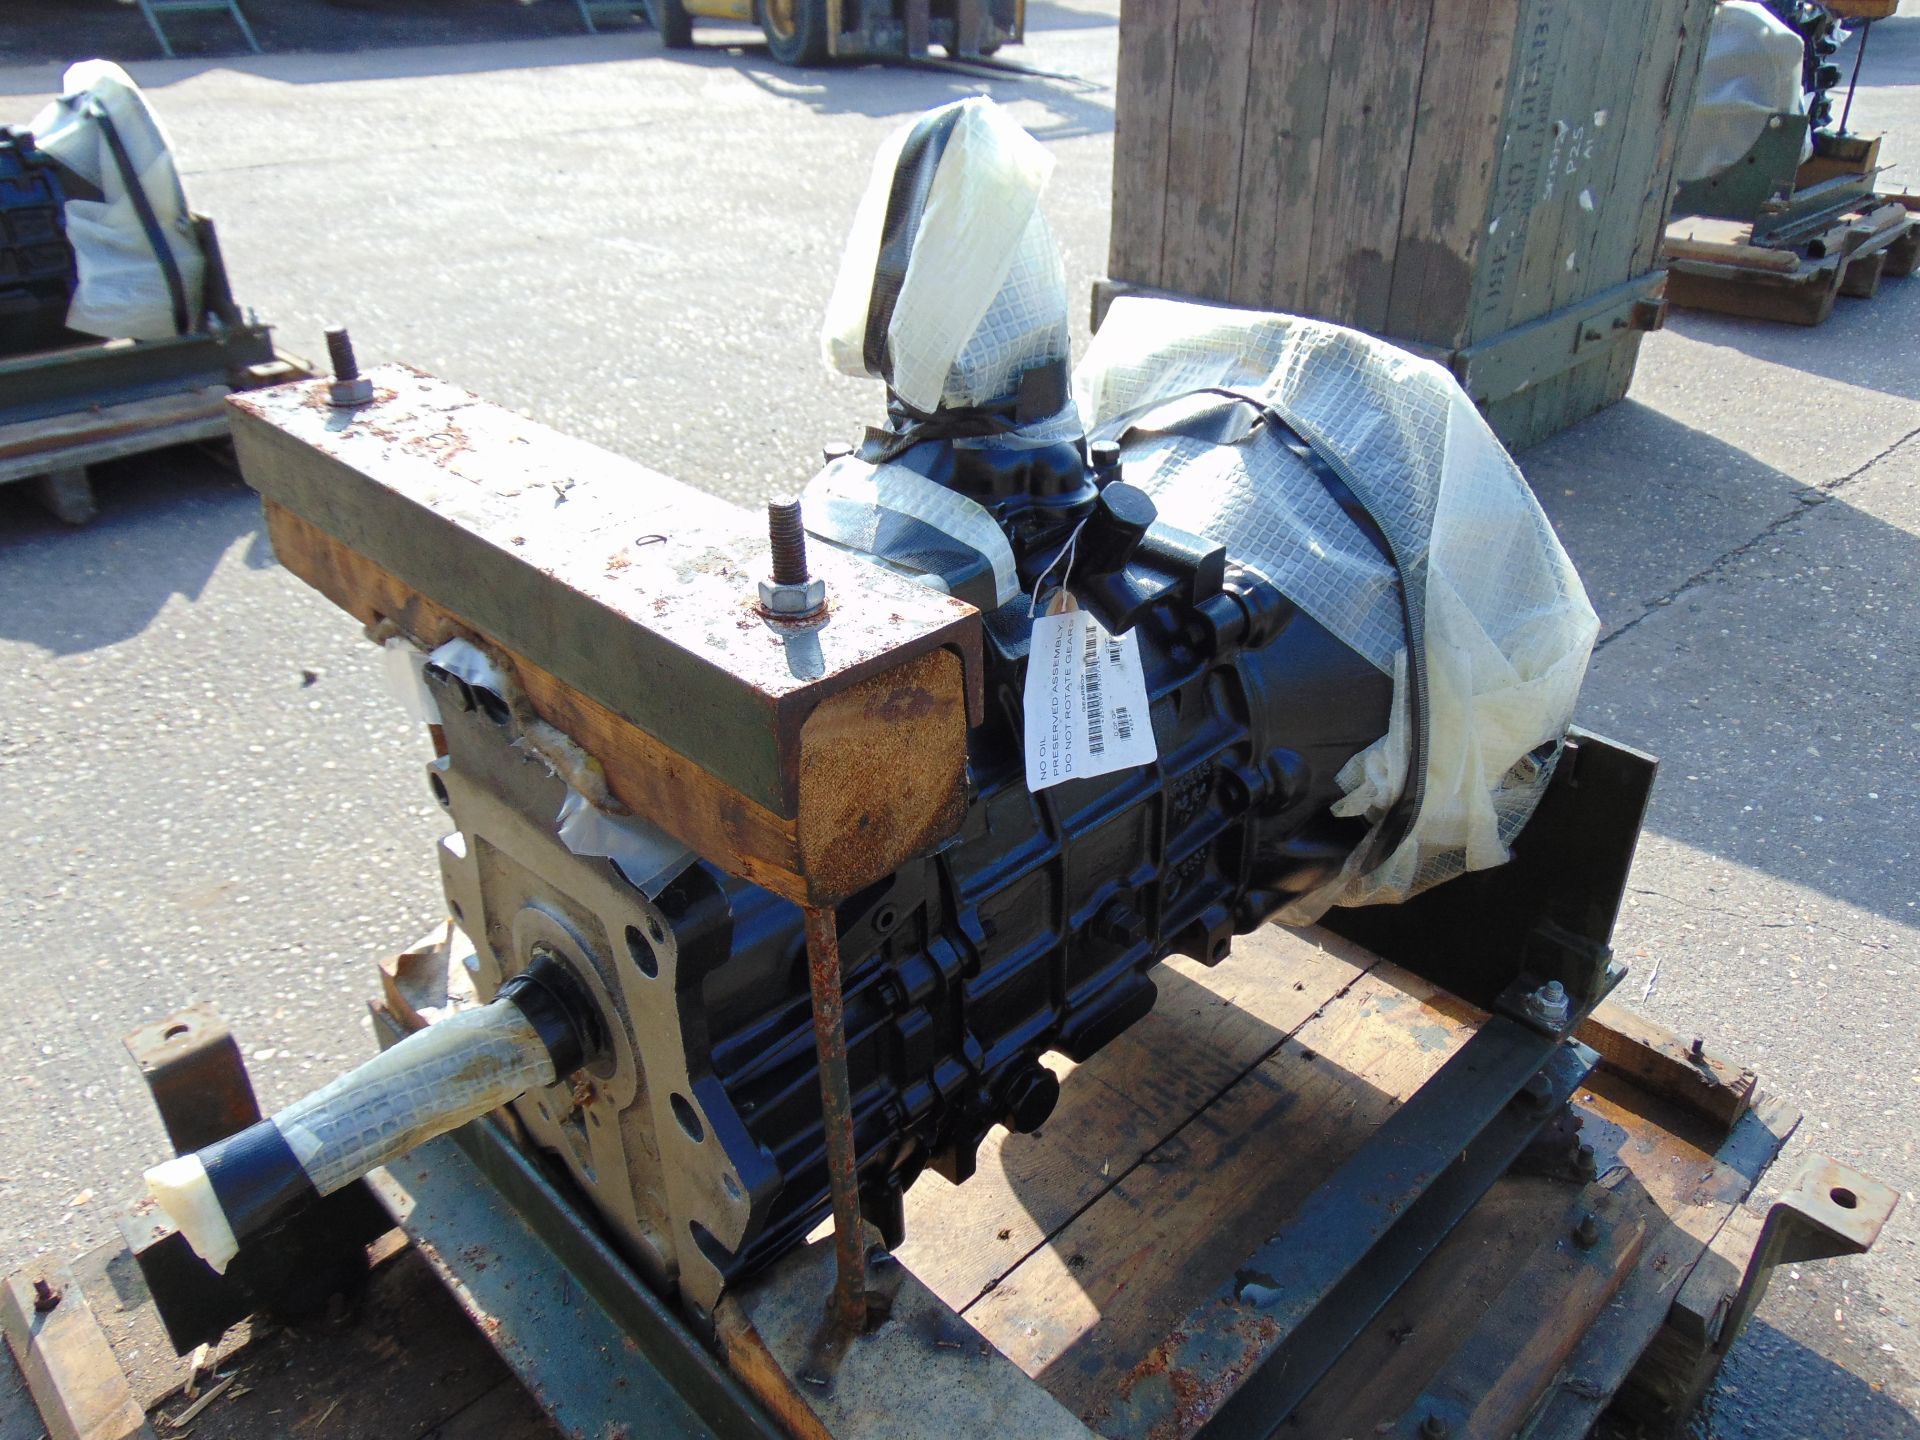 A1 Reconditioned Land Rover LT77 Gearbox - Image 2 of 4